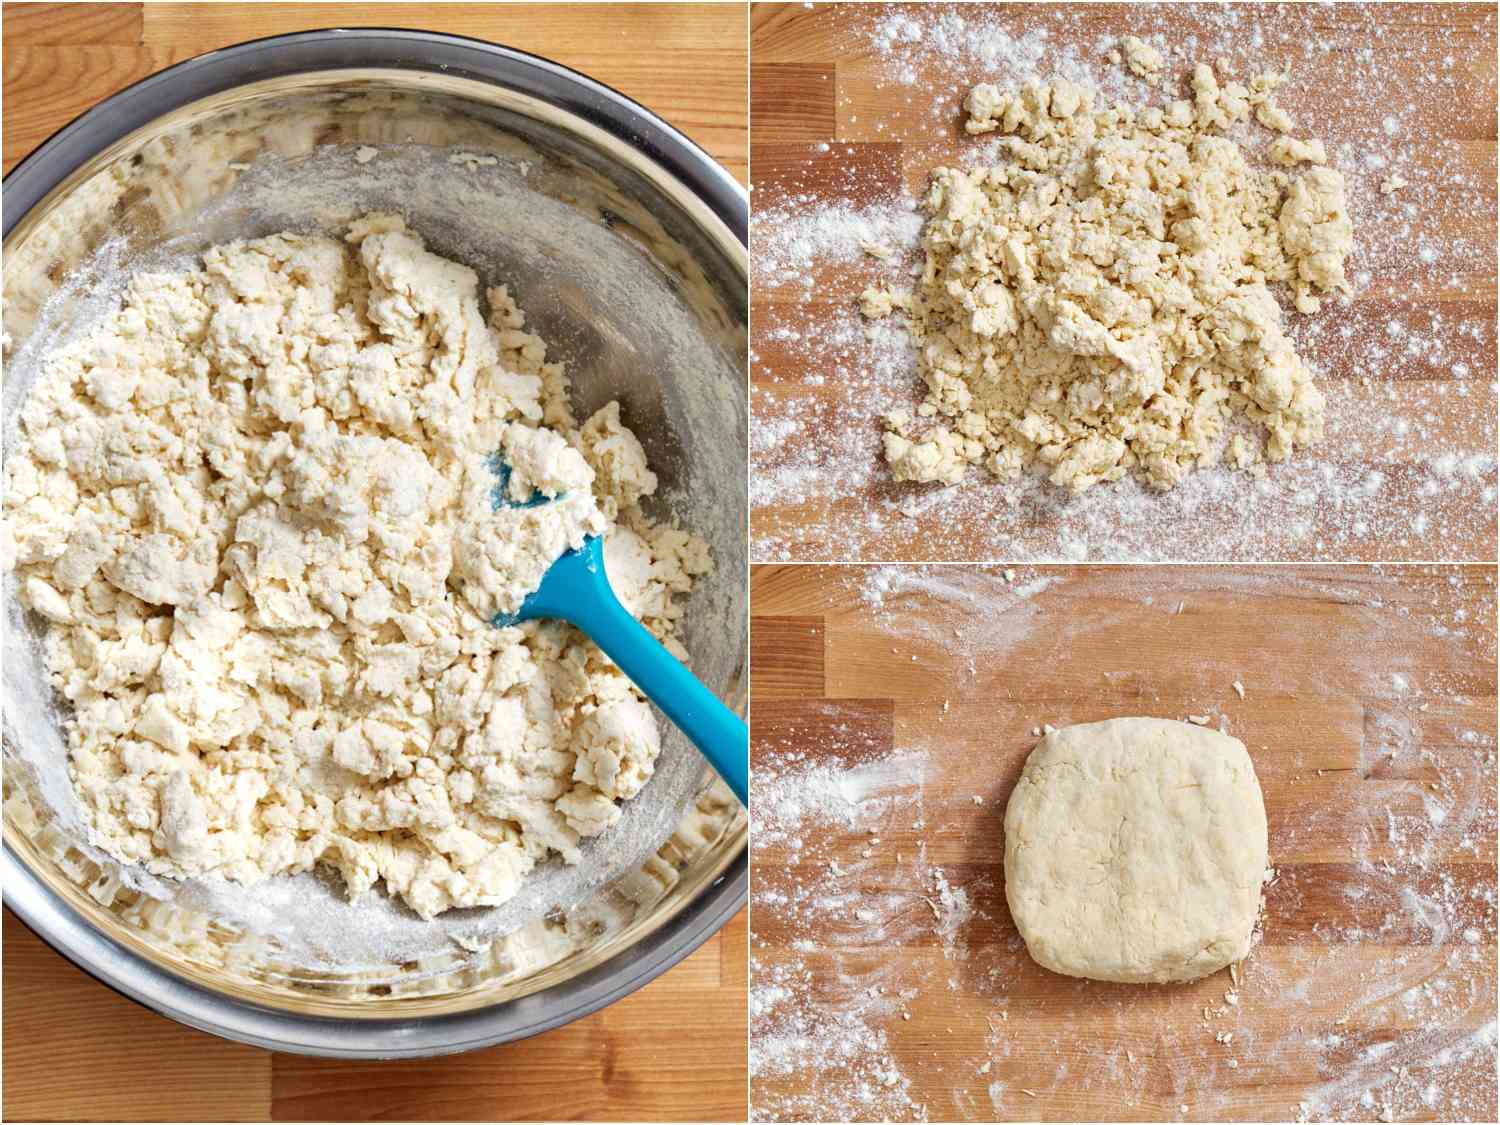 A collage: butter and flour mixtures combined with liquids; the loose mixture on a work surface; the mixtures kneaded into a cohesive block